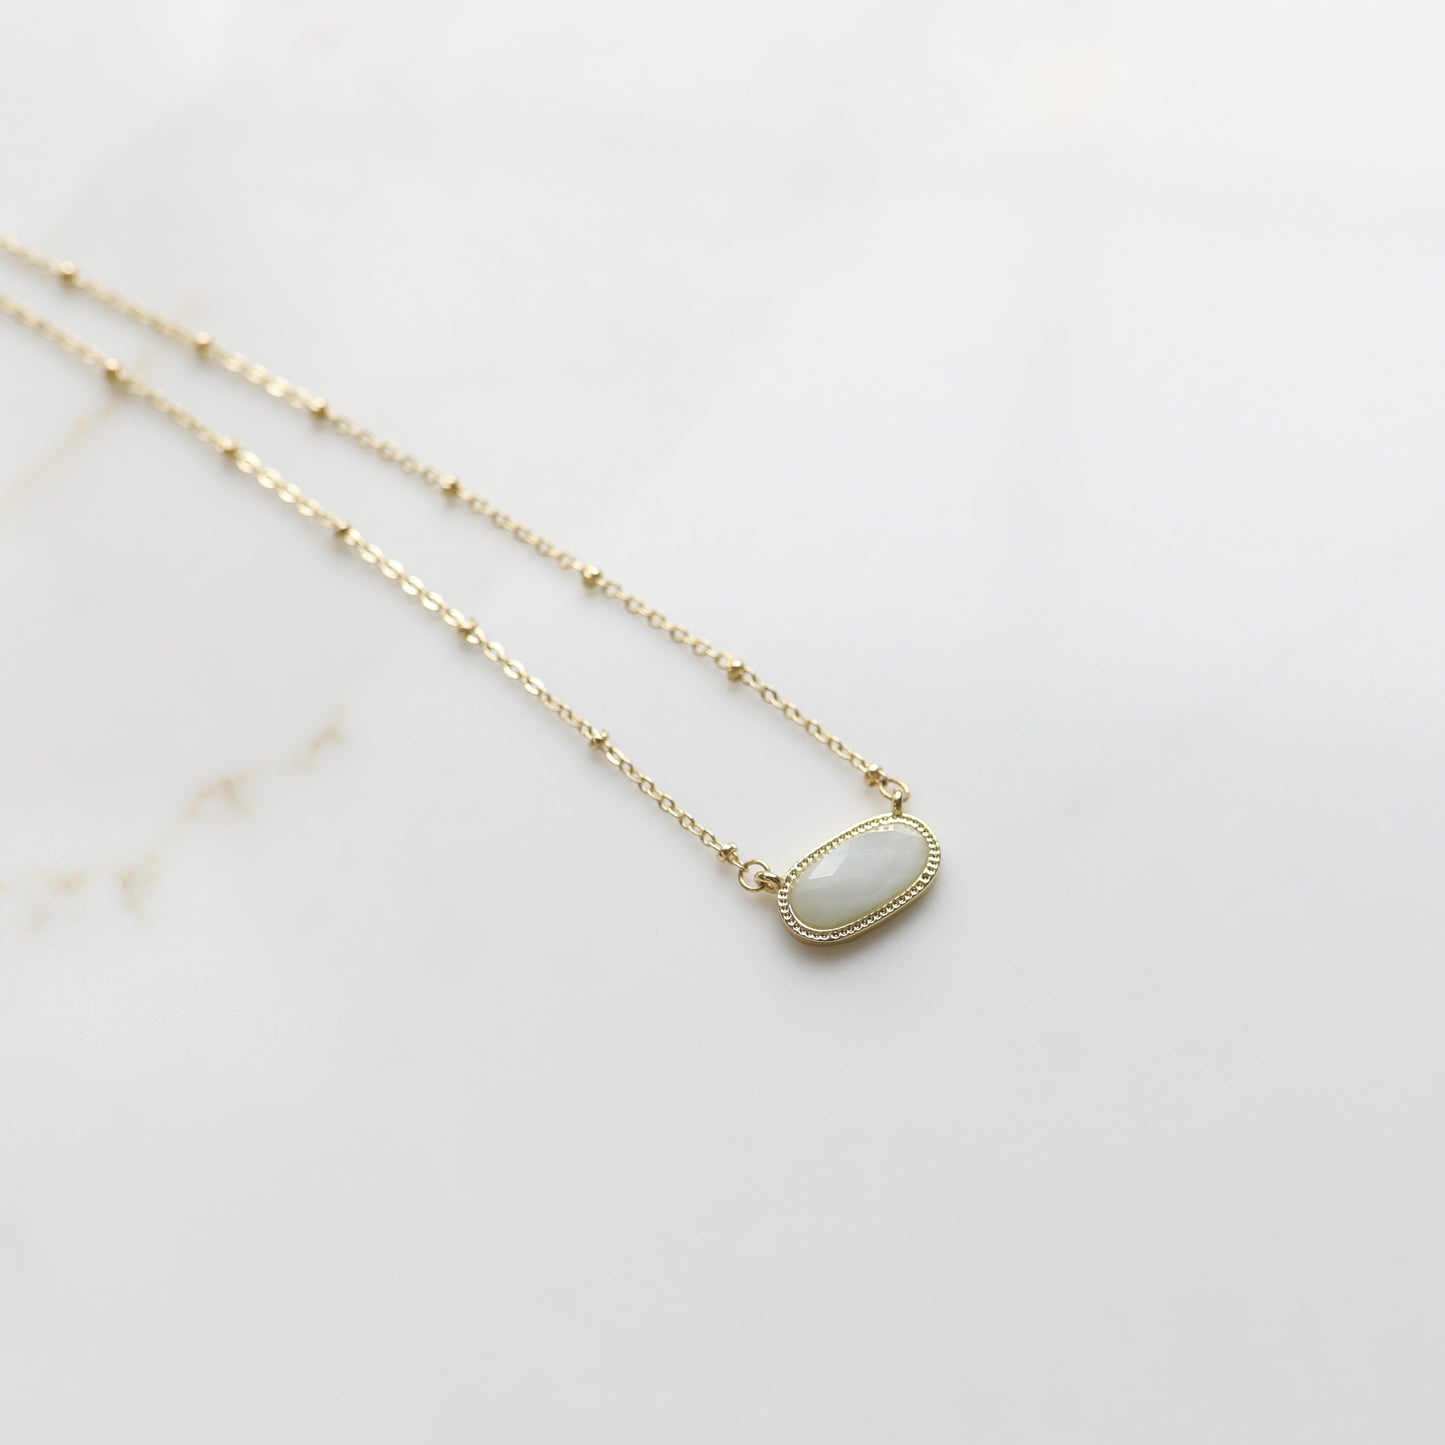 Meaningful Gemstone Necklace in Aquamarine available with a Gold or Silver chain